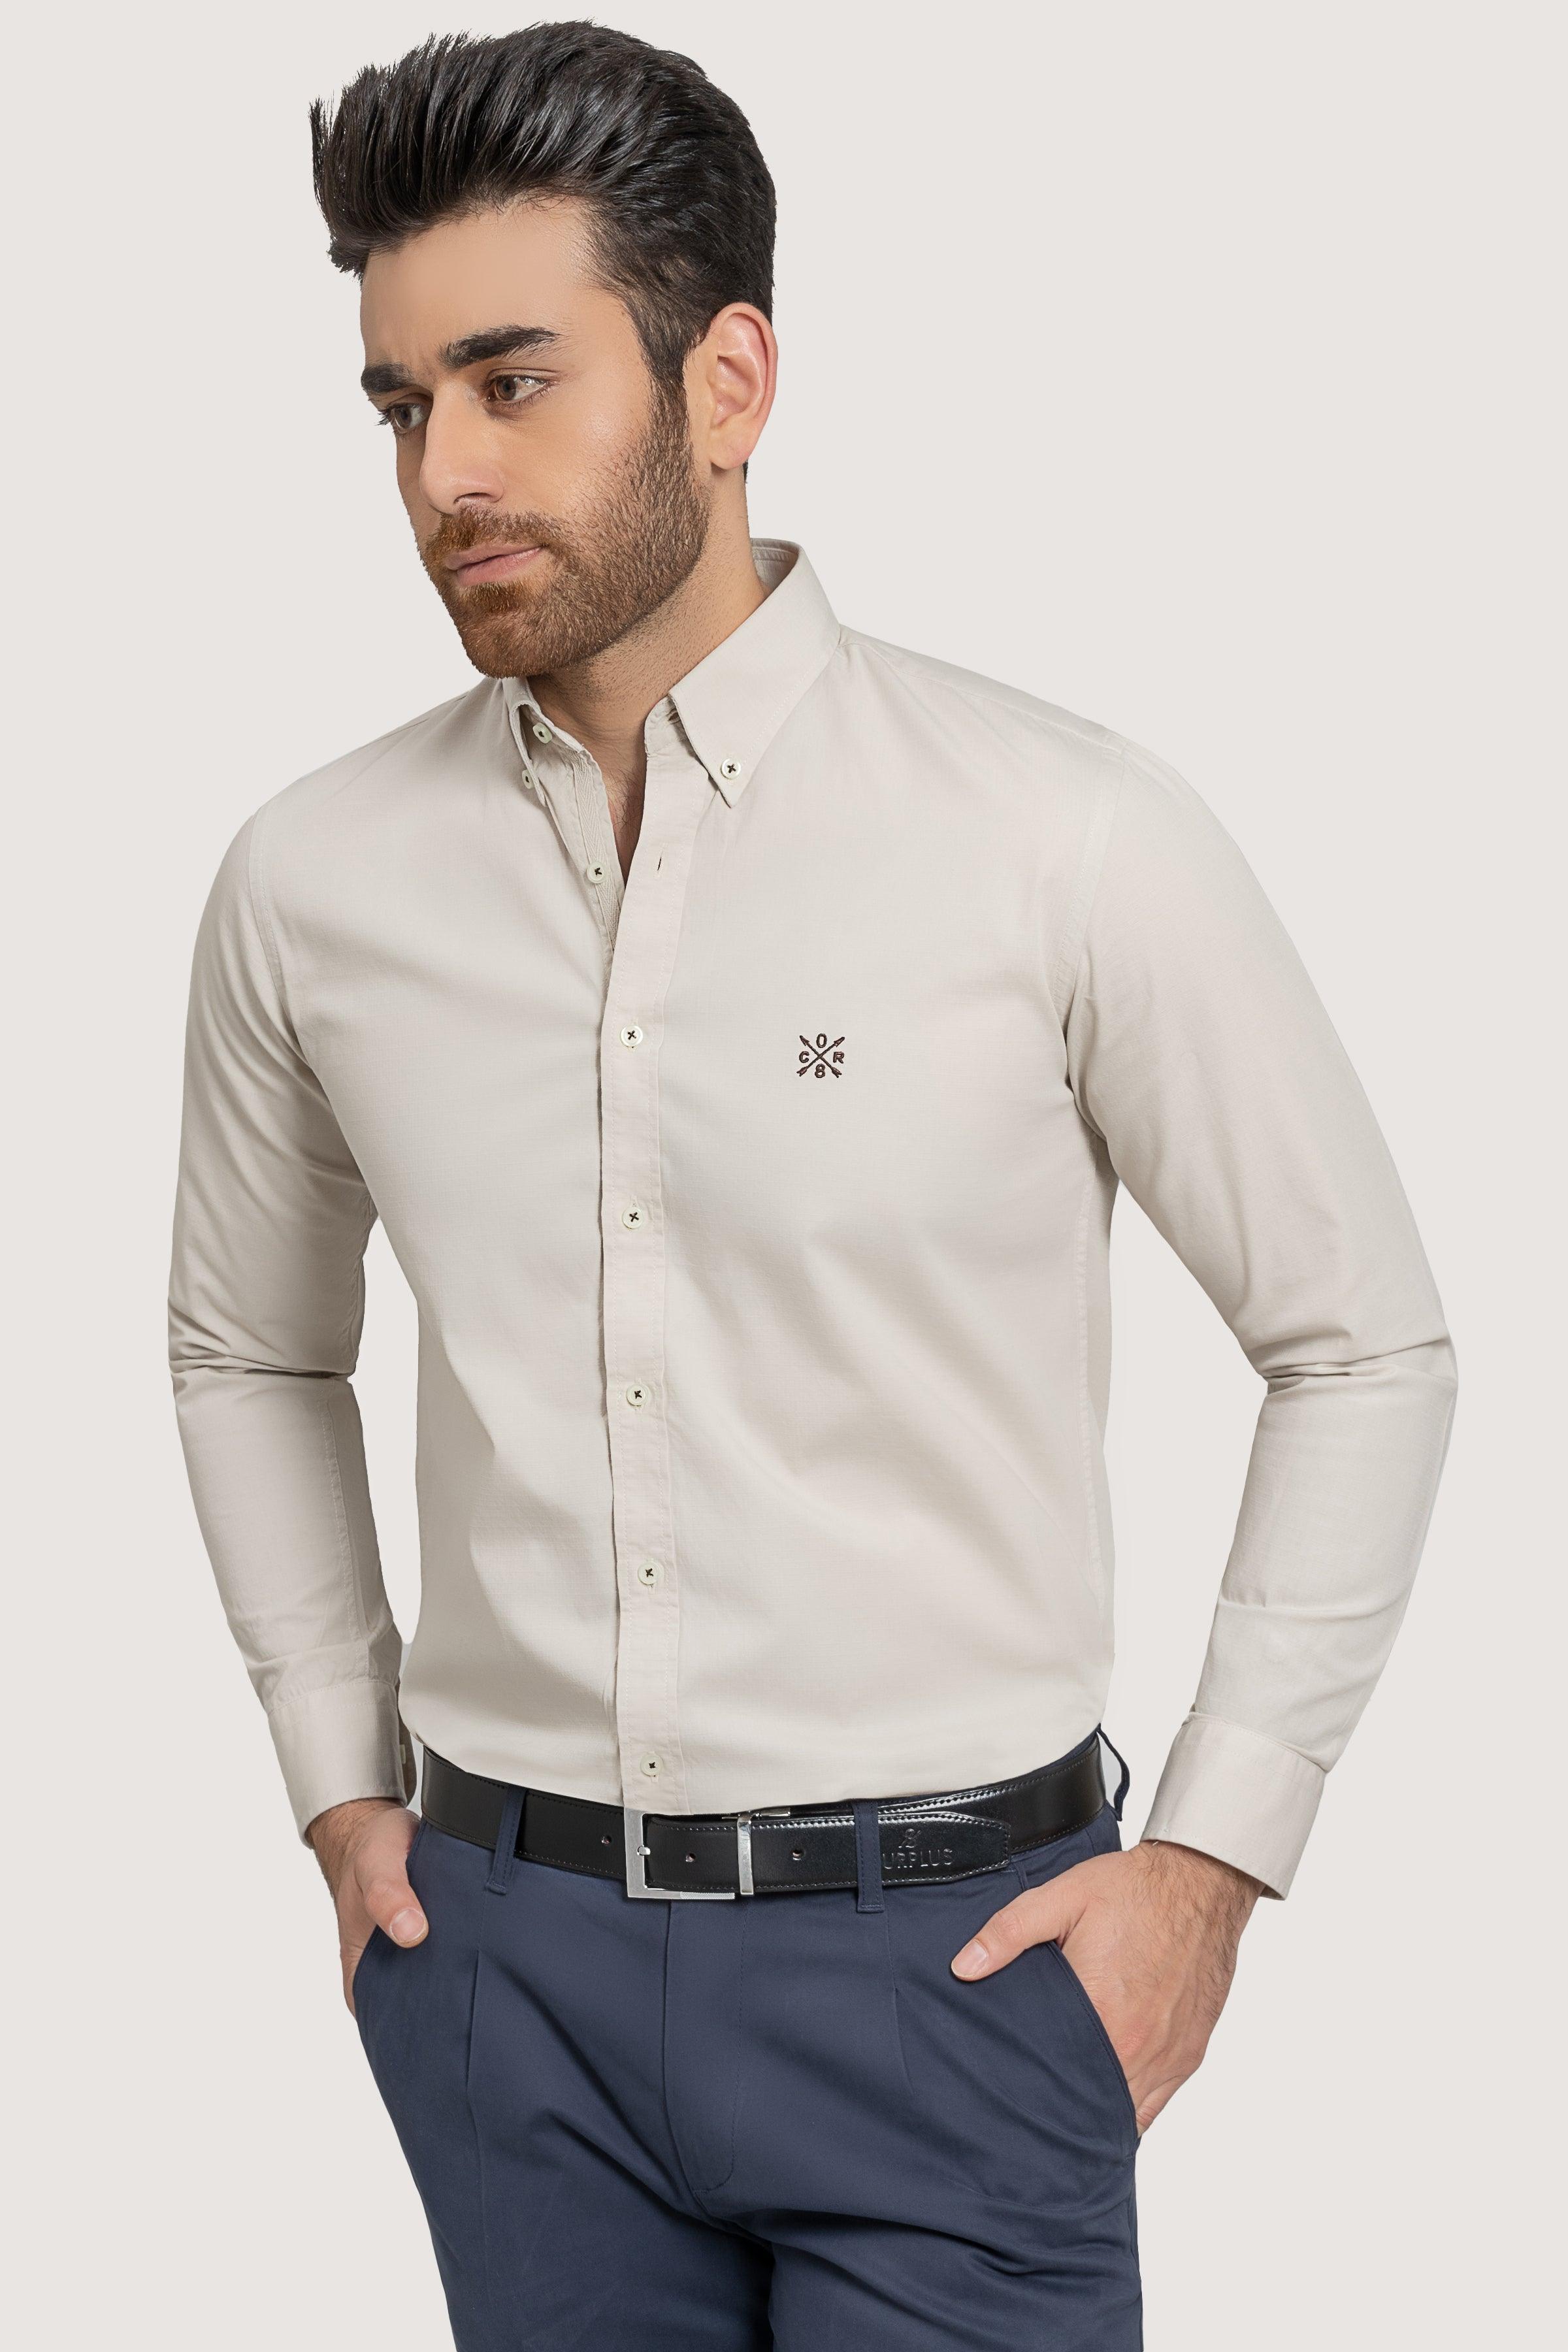 SEMI CASUAL GARMENT DYED SHIRT BEIGE at Charcoal Clothing